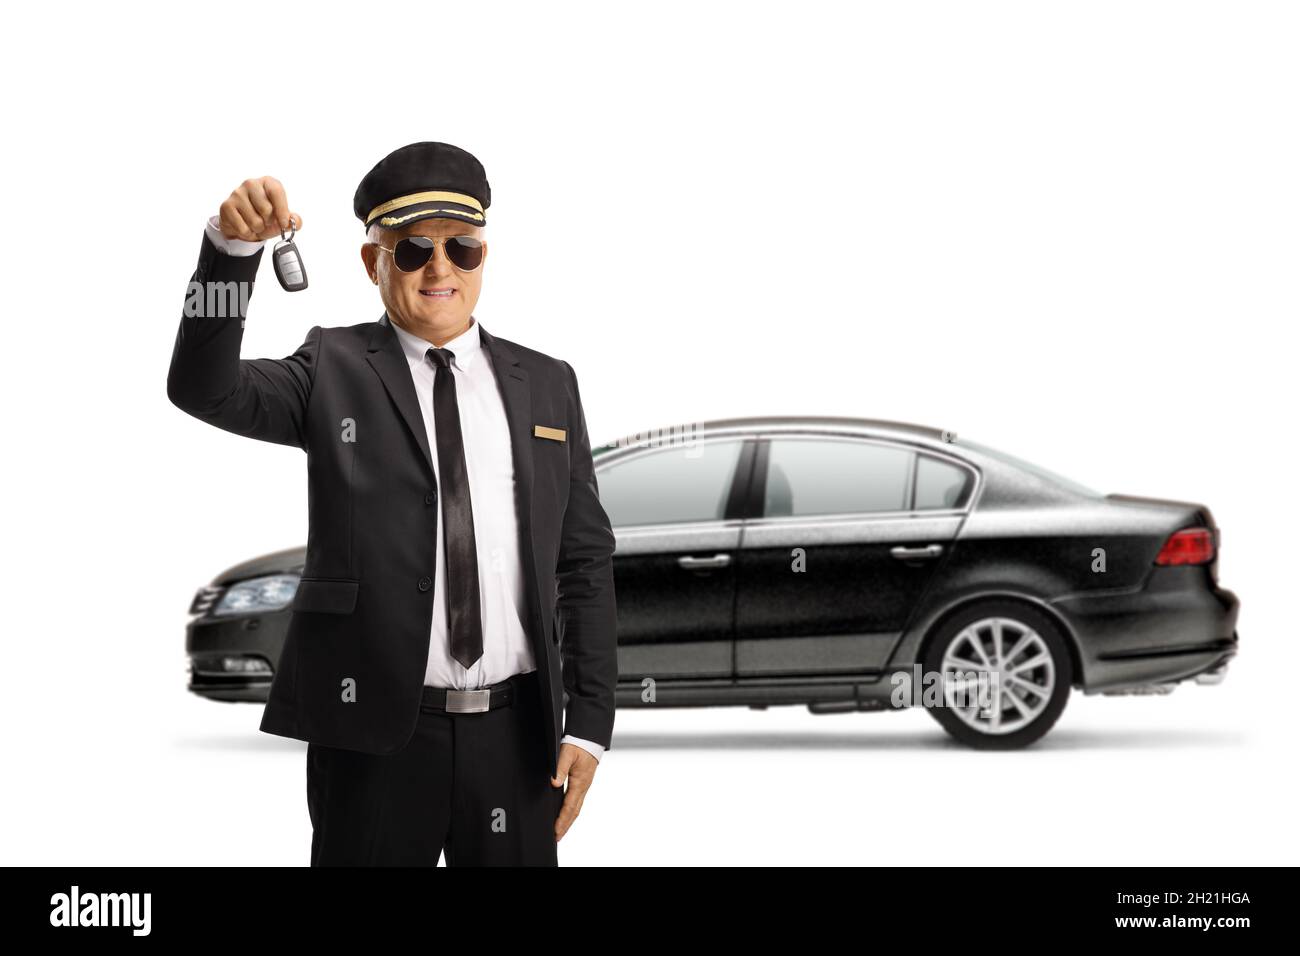 Mature chauffeur in a uniform with sunglasses holding a car key from a black car isolated on white background Stock Photo